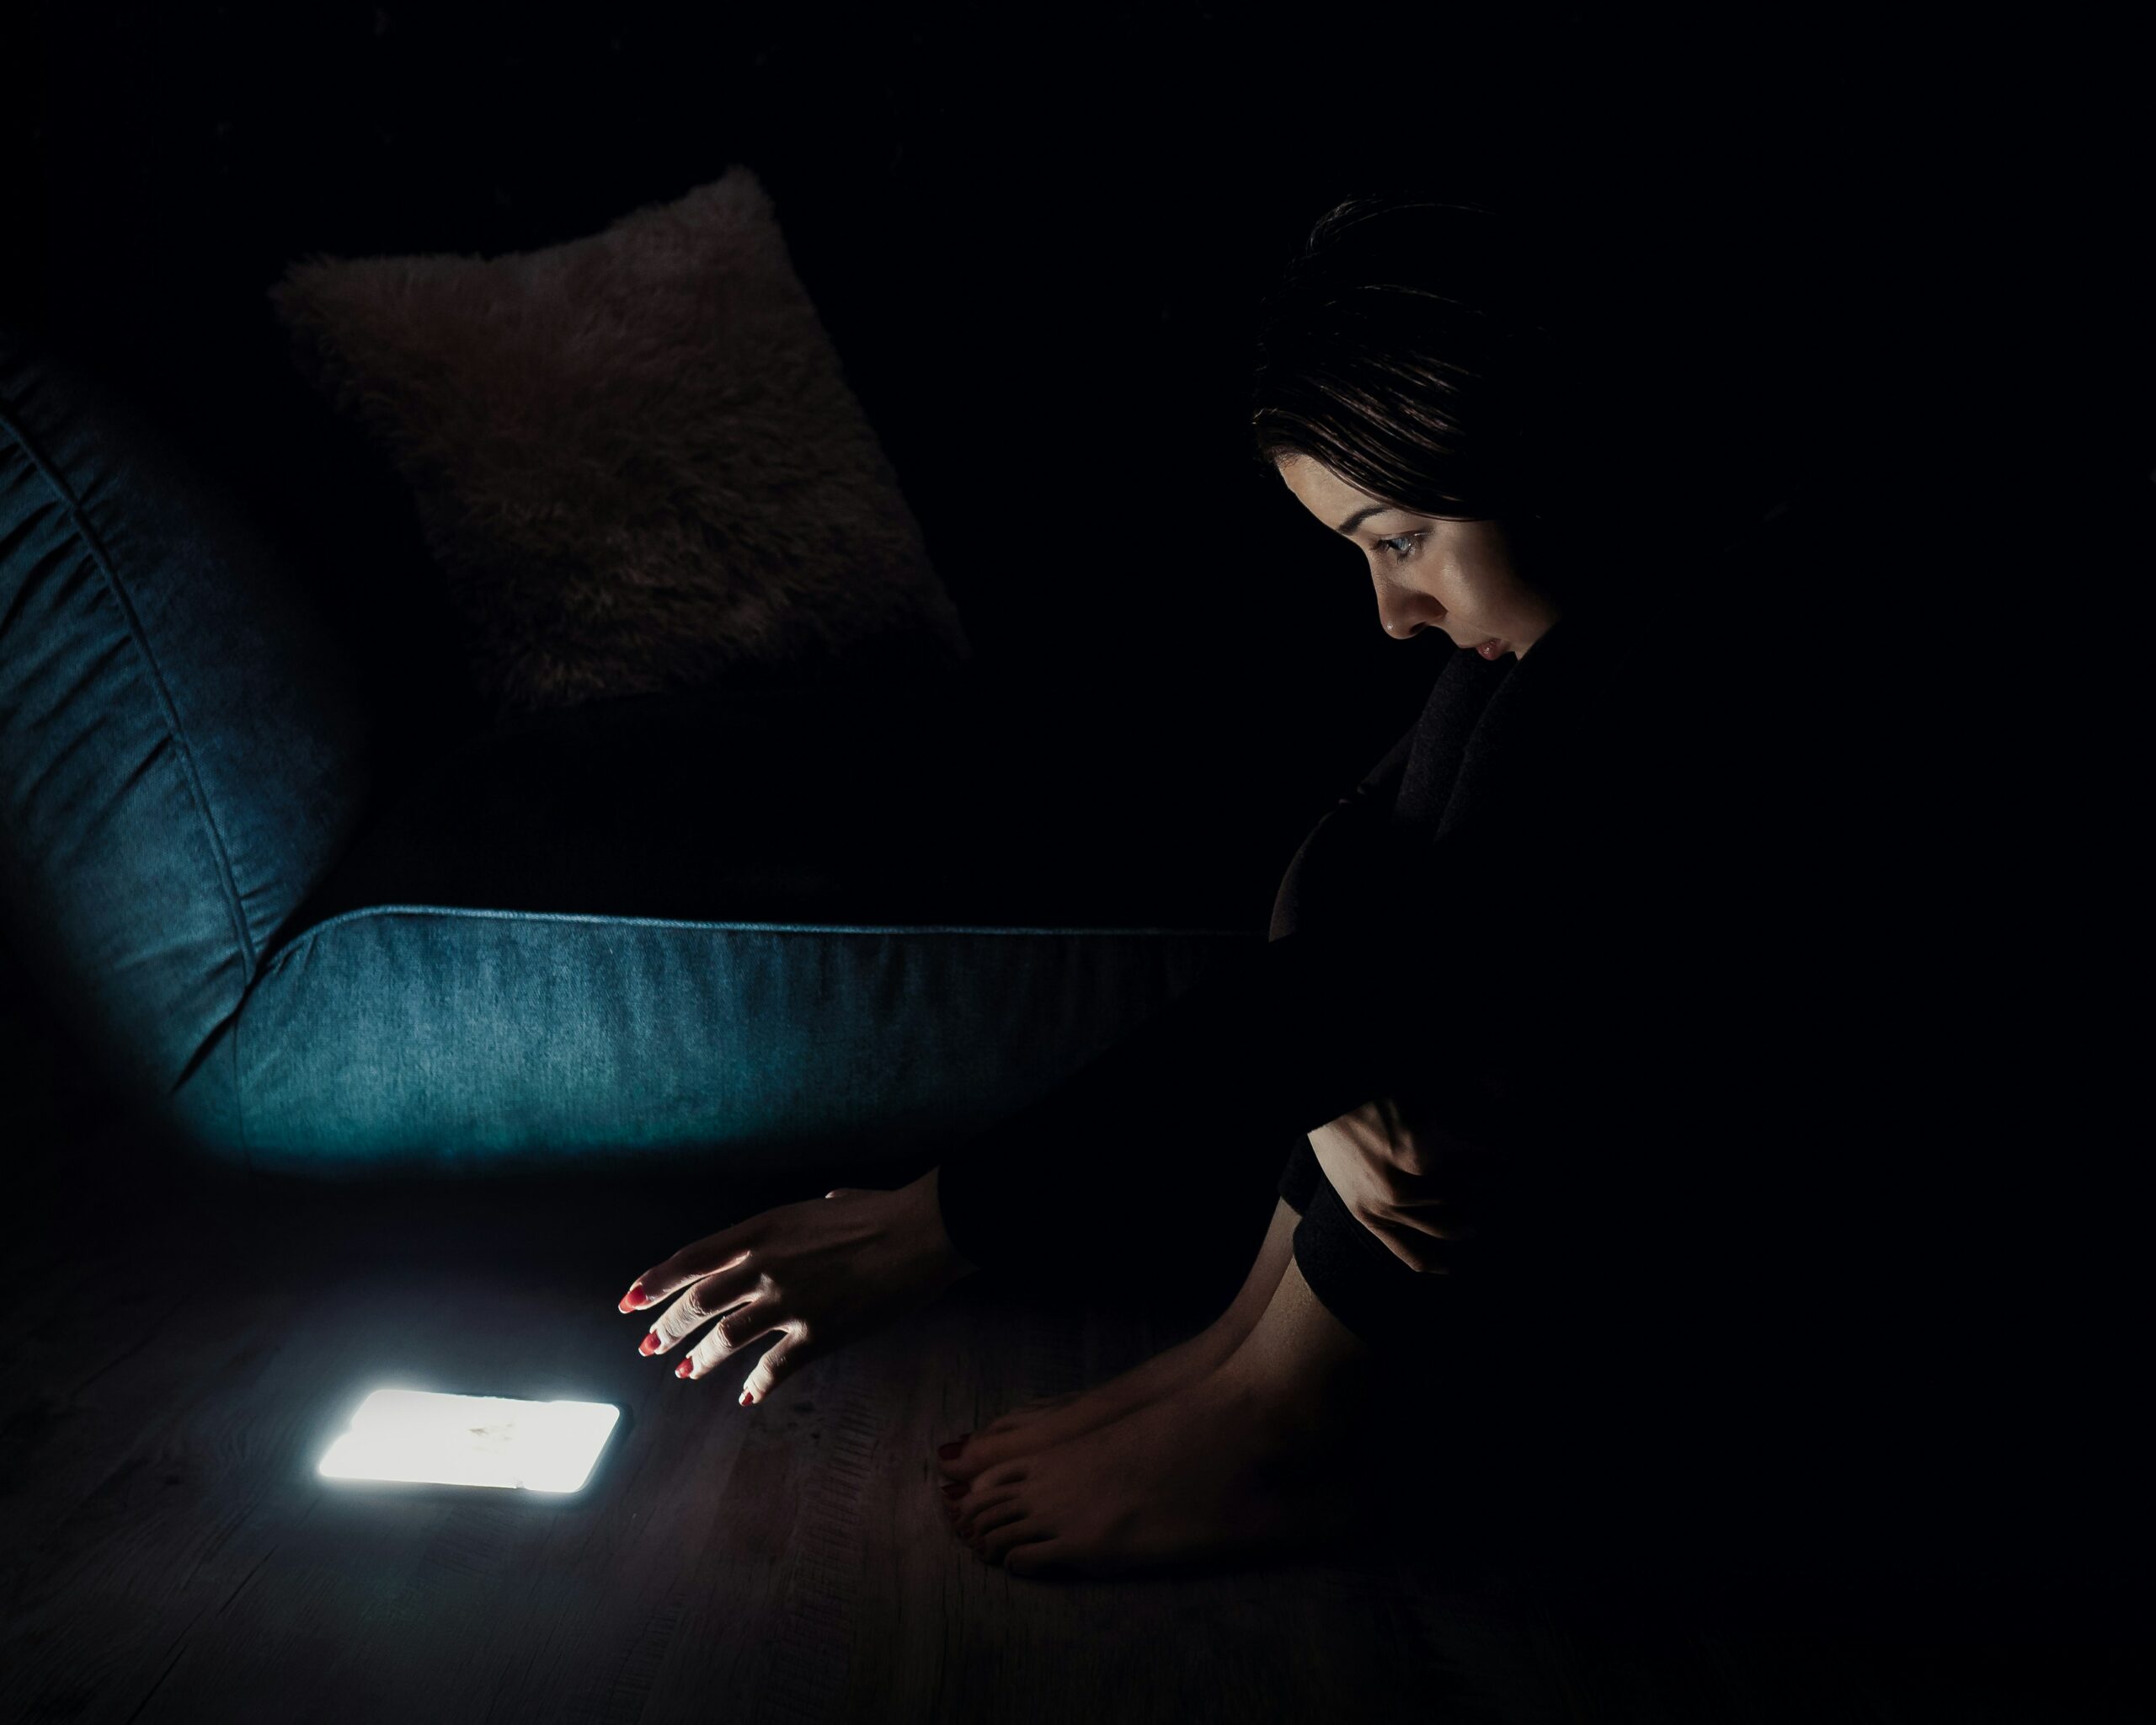 Woman sitting in a dark room. Her face is illuminated by the light coming from her phone.